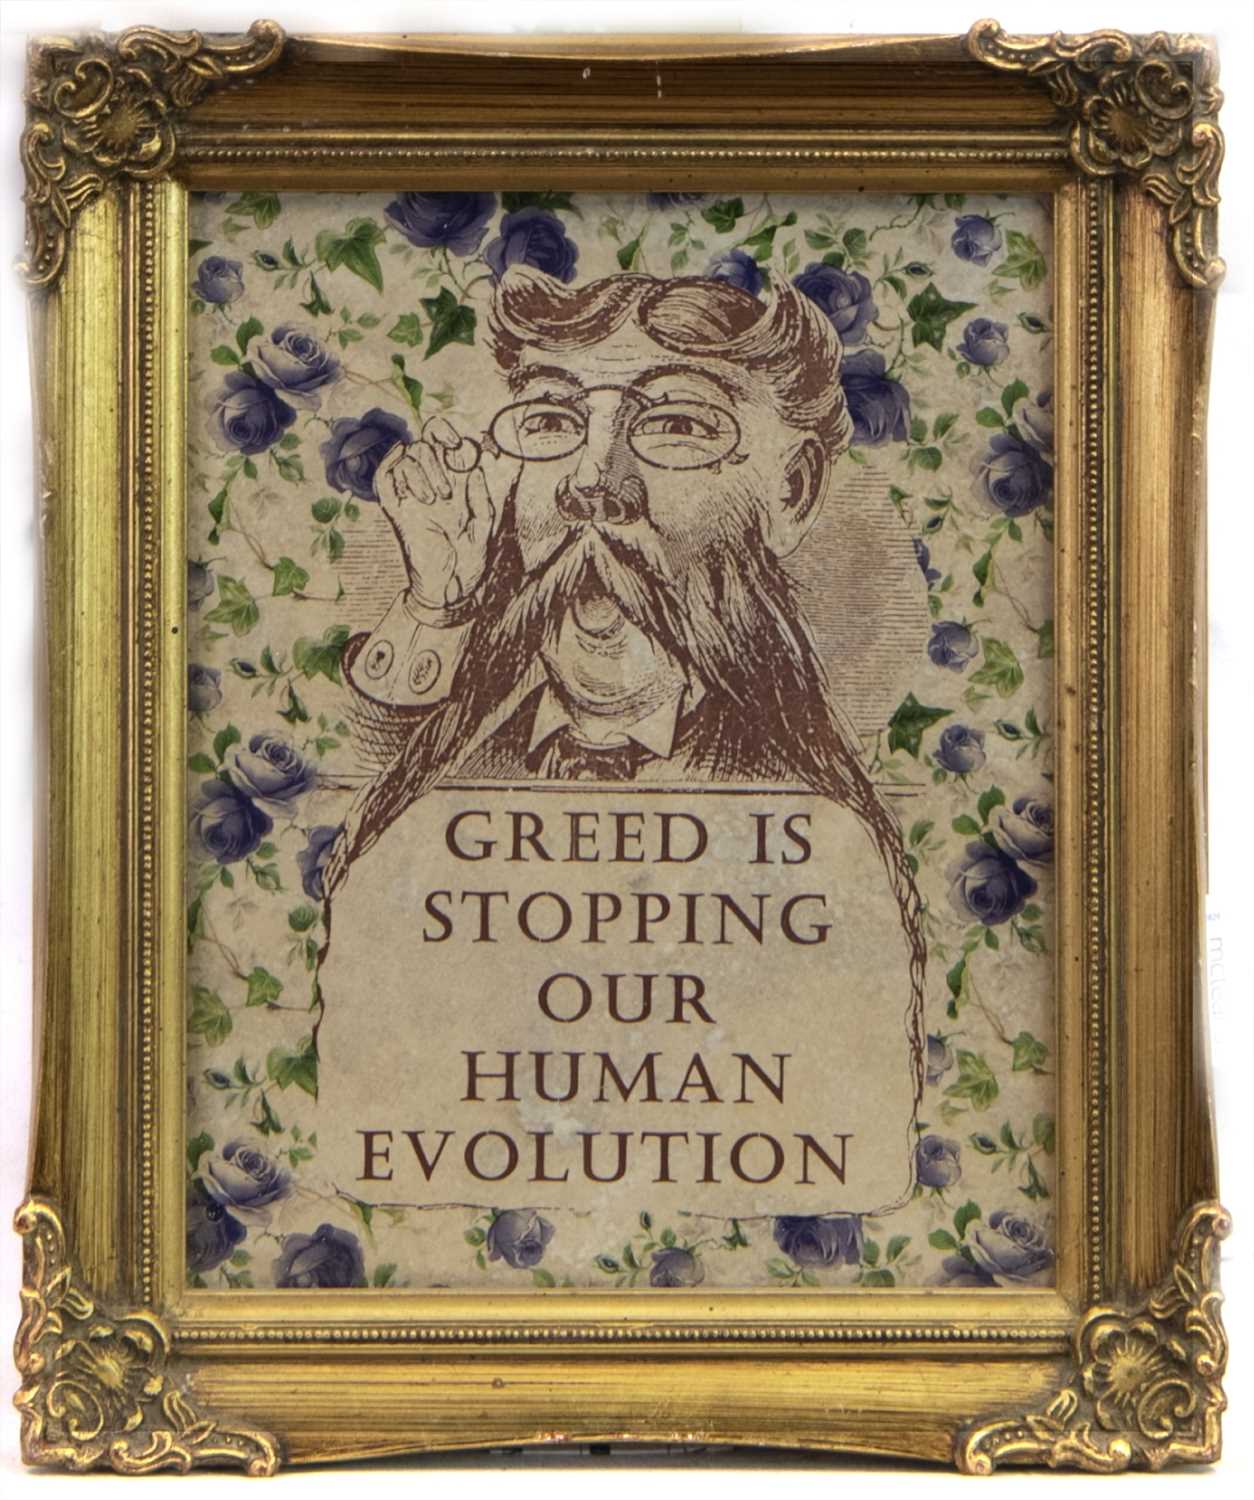 Lot 660 - GREED IS STOPPING OUR HUMAN EVOLUTION, A CERAMIC TILE BY CARRIE REICHARDT